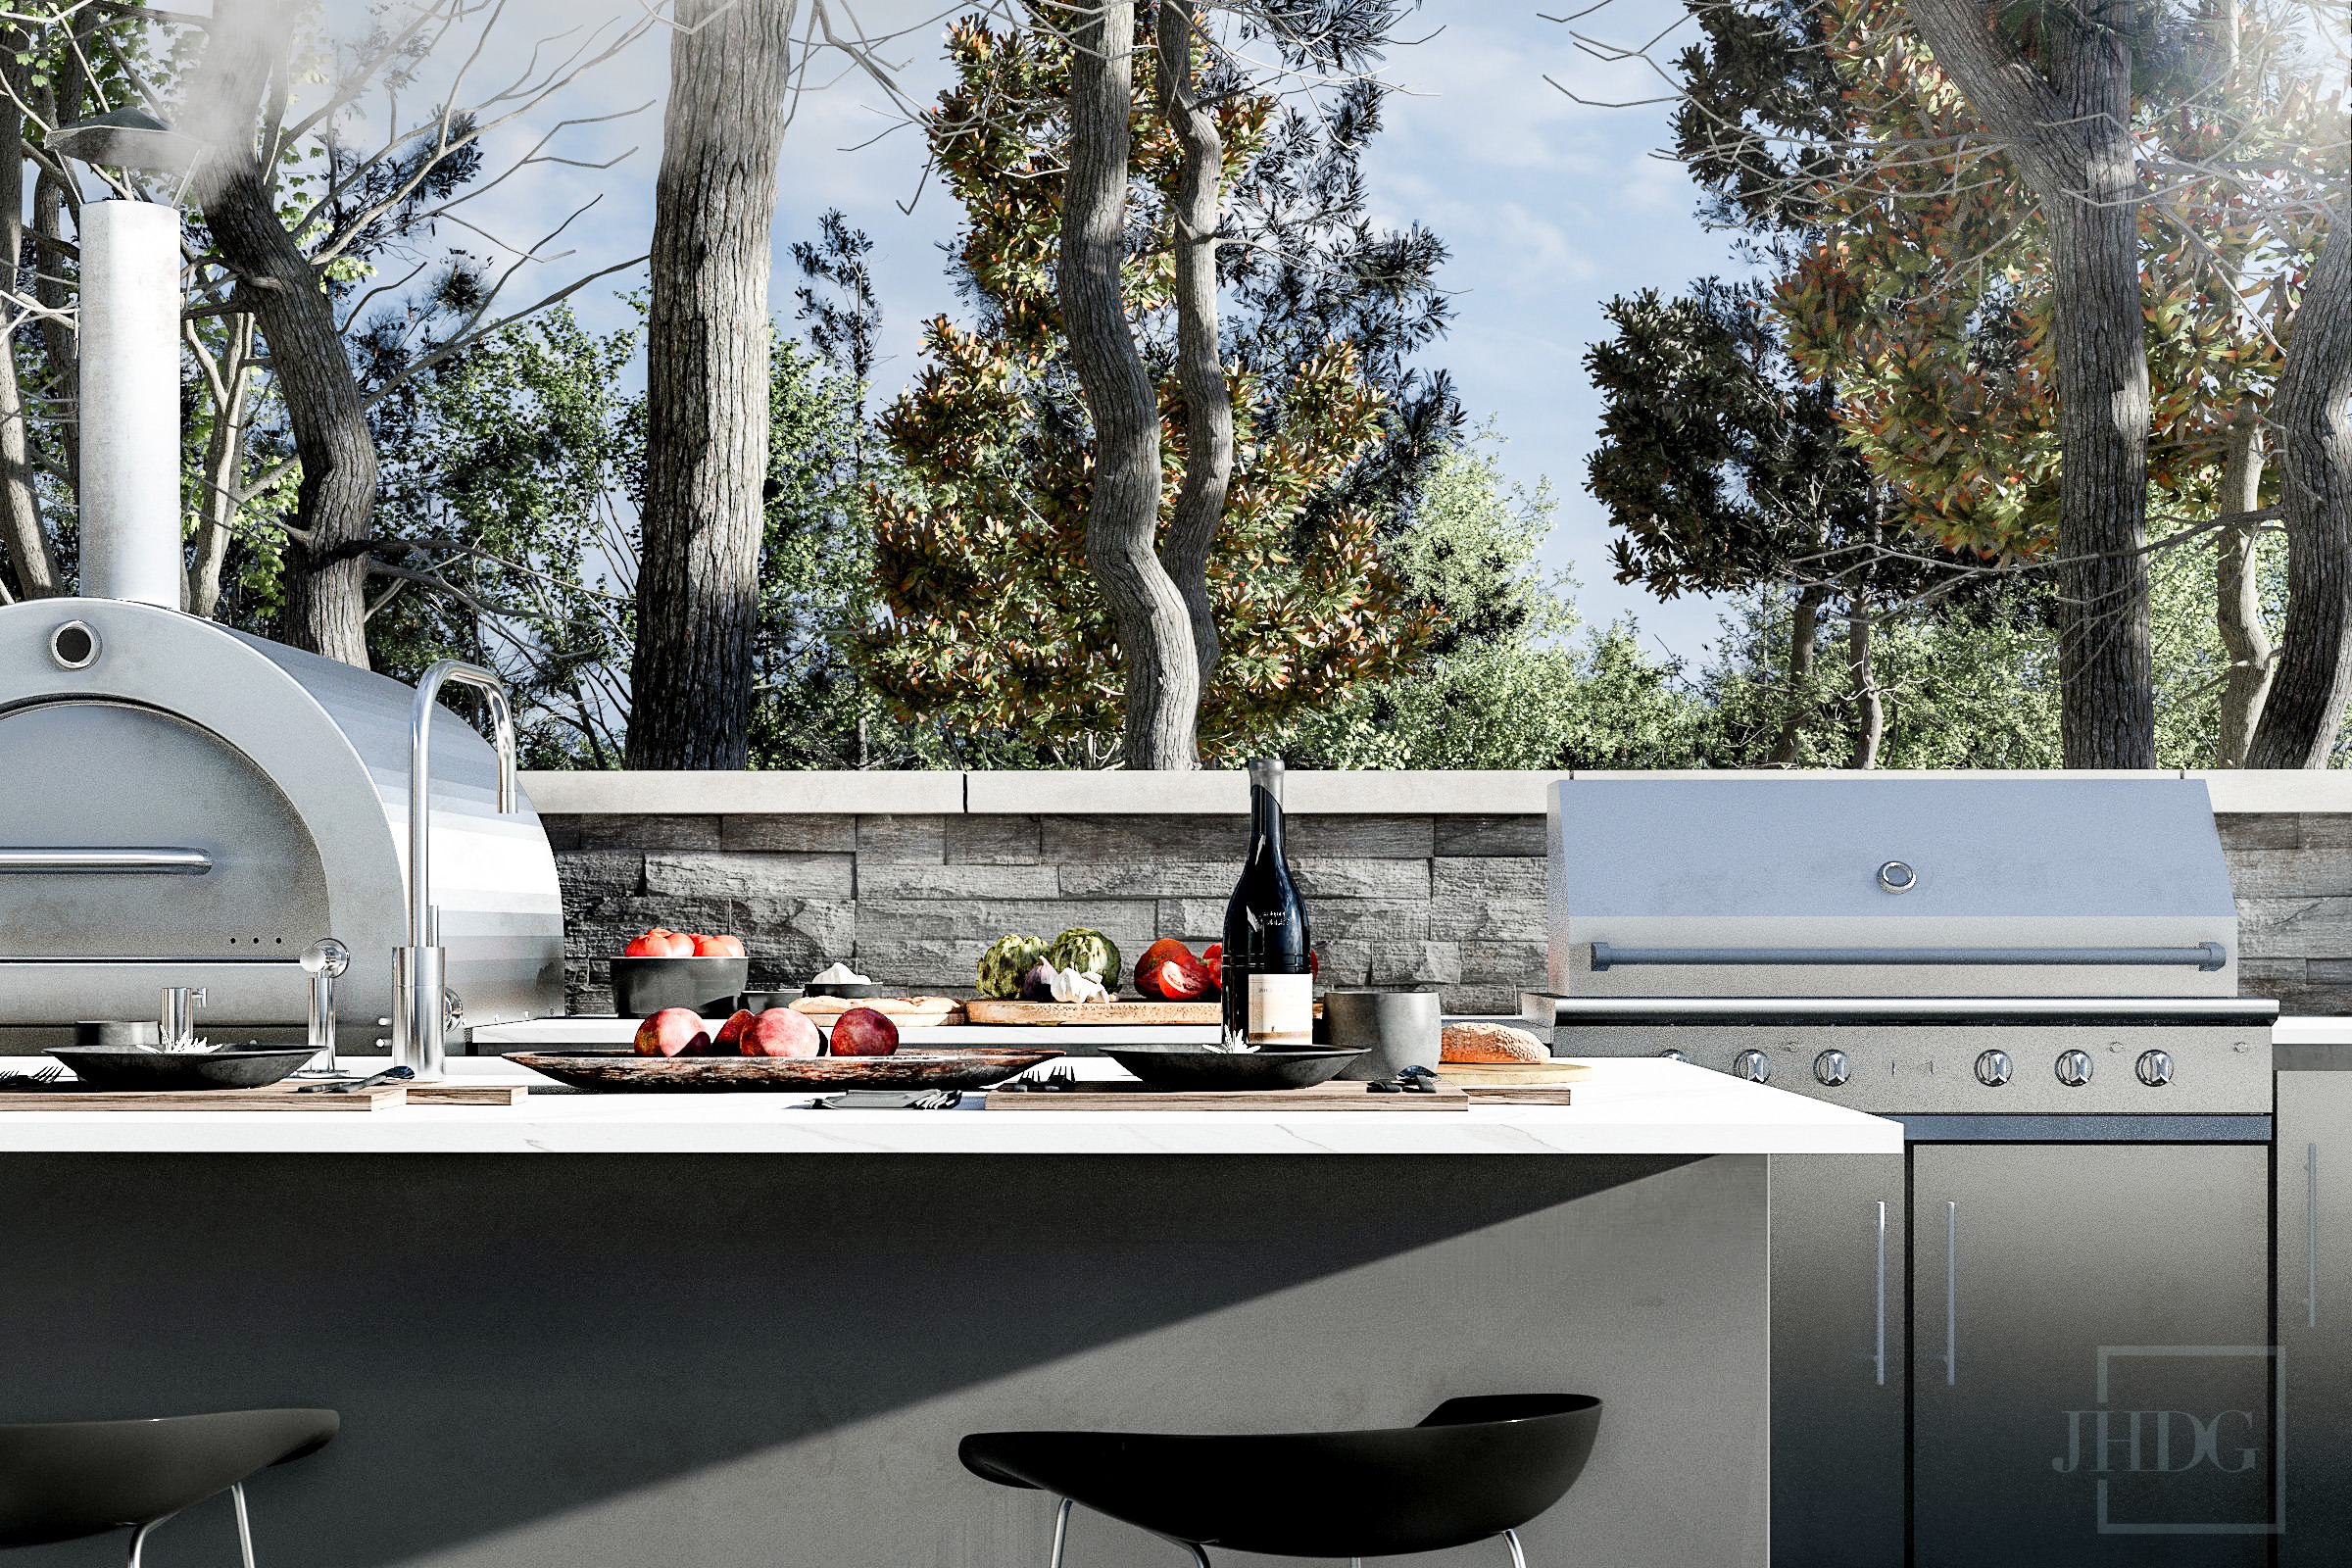 3D render landscape design of an outdoor kitchen with pizza oven and bbq in cottage country